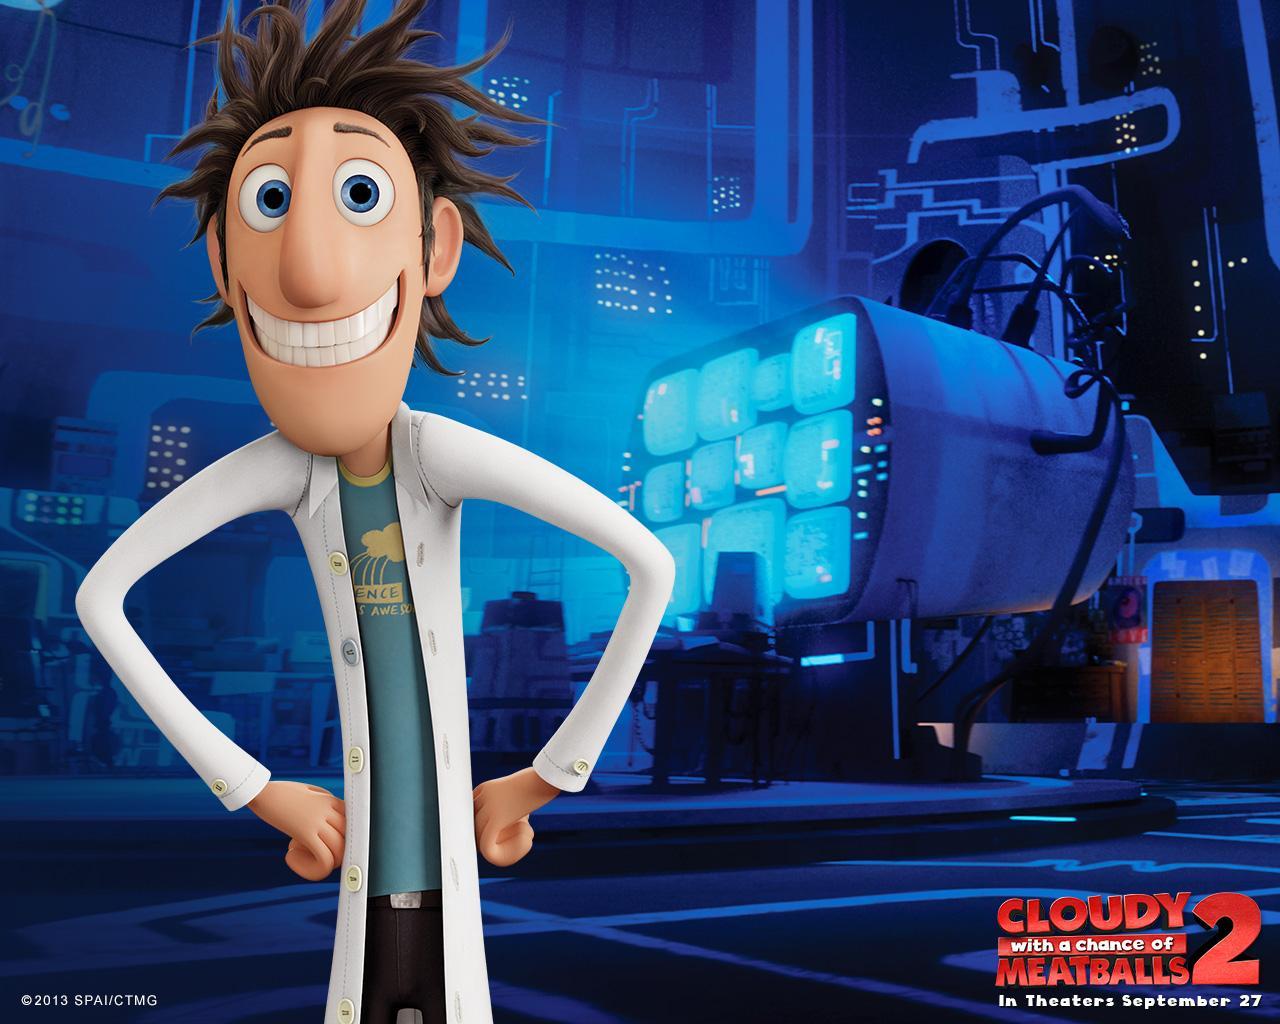 Wallpaper Blink with a Chance of Meatballs Wallpaper HD 15